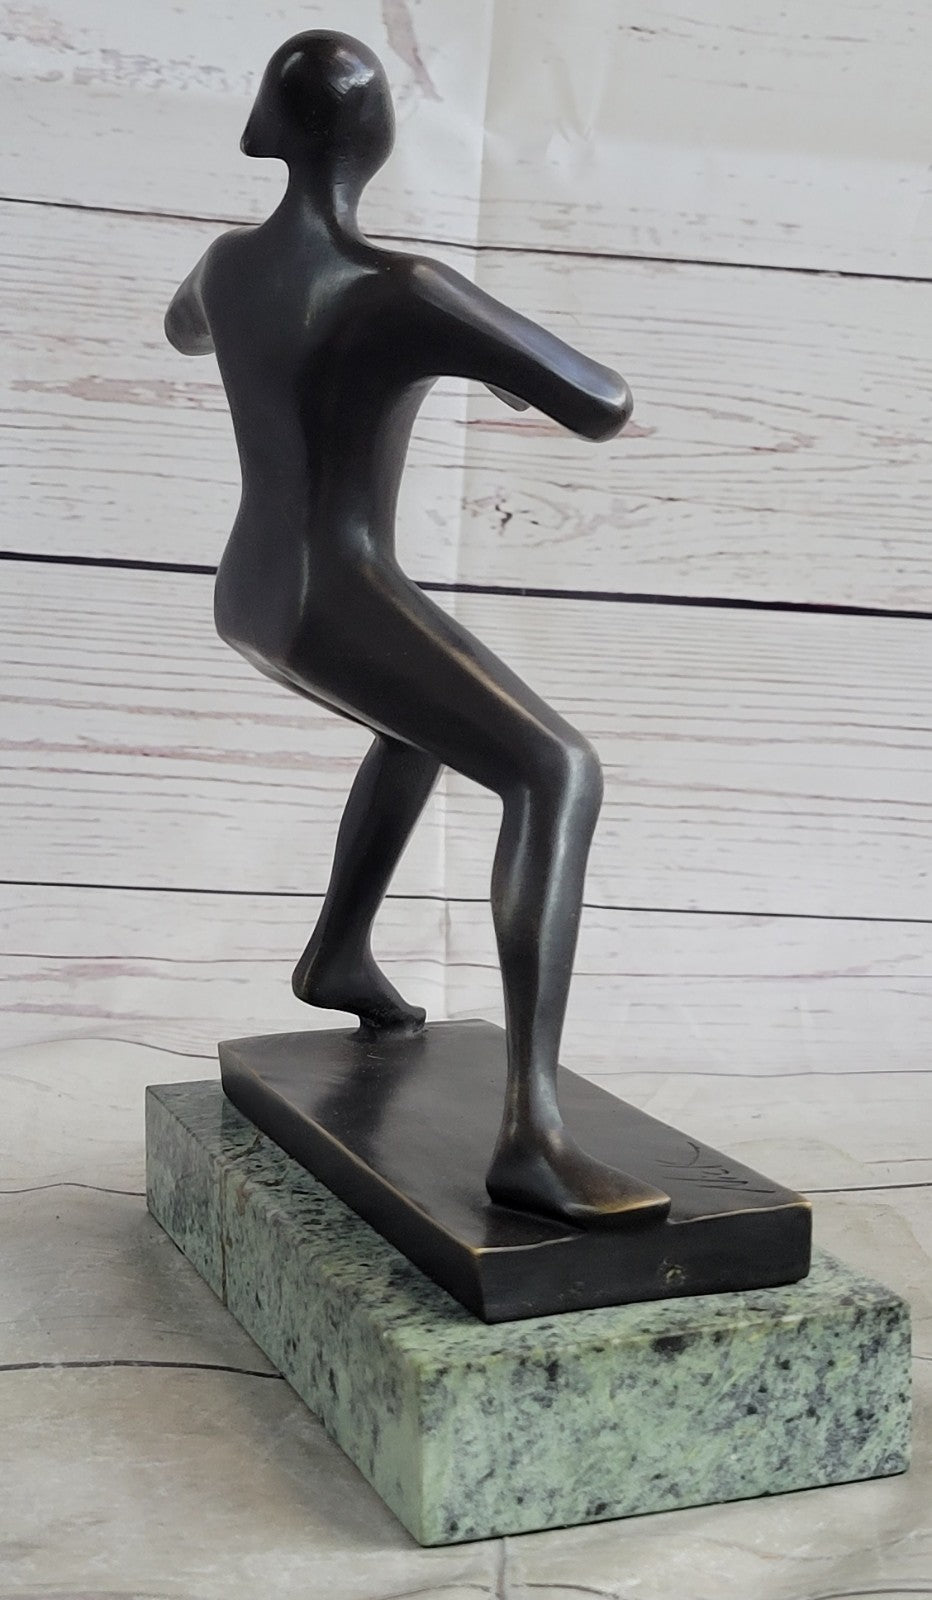 100% Solid Bronze Woman Girl Ping Pong Player with Green Marble Base Signed